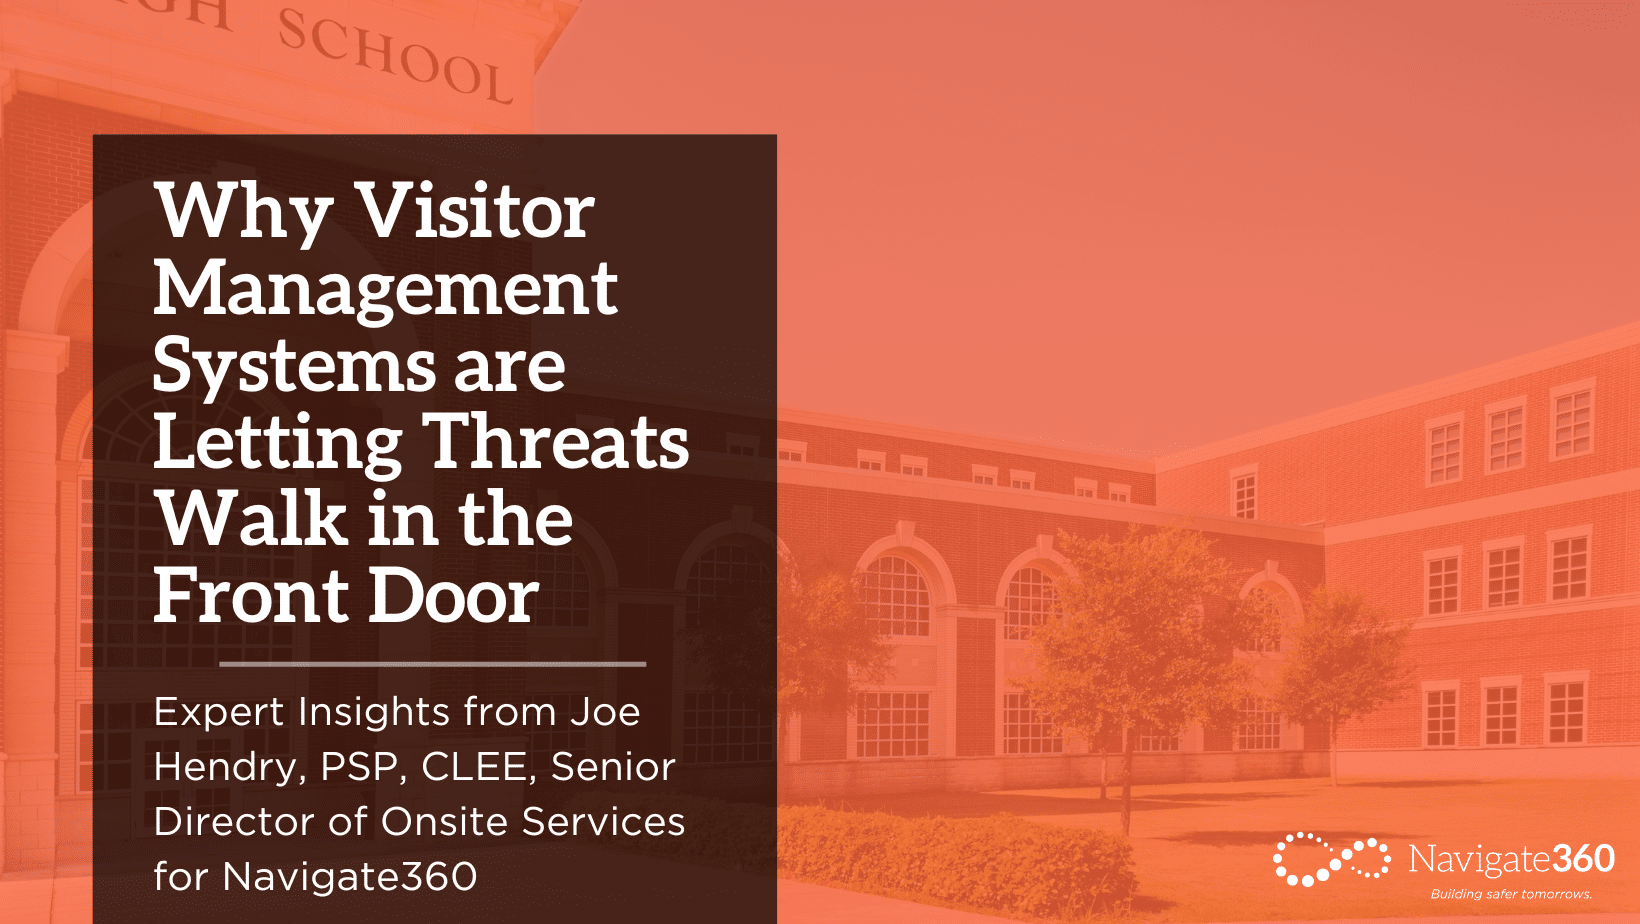 Why Visitor Management Systems are Letting Threats Walk in the Front Door